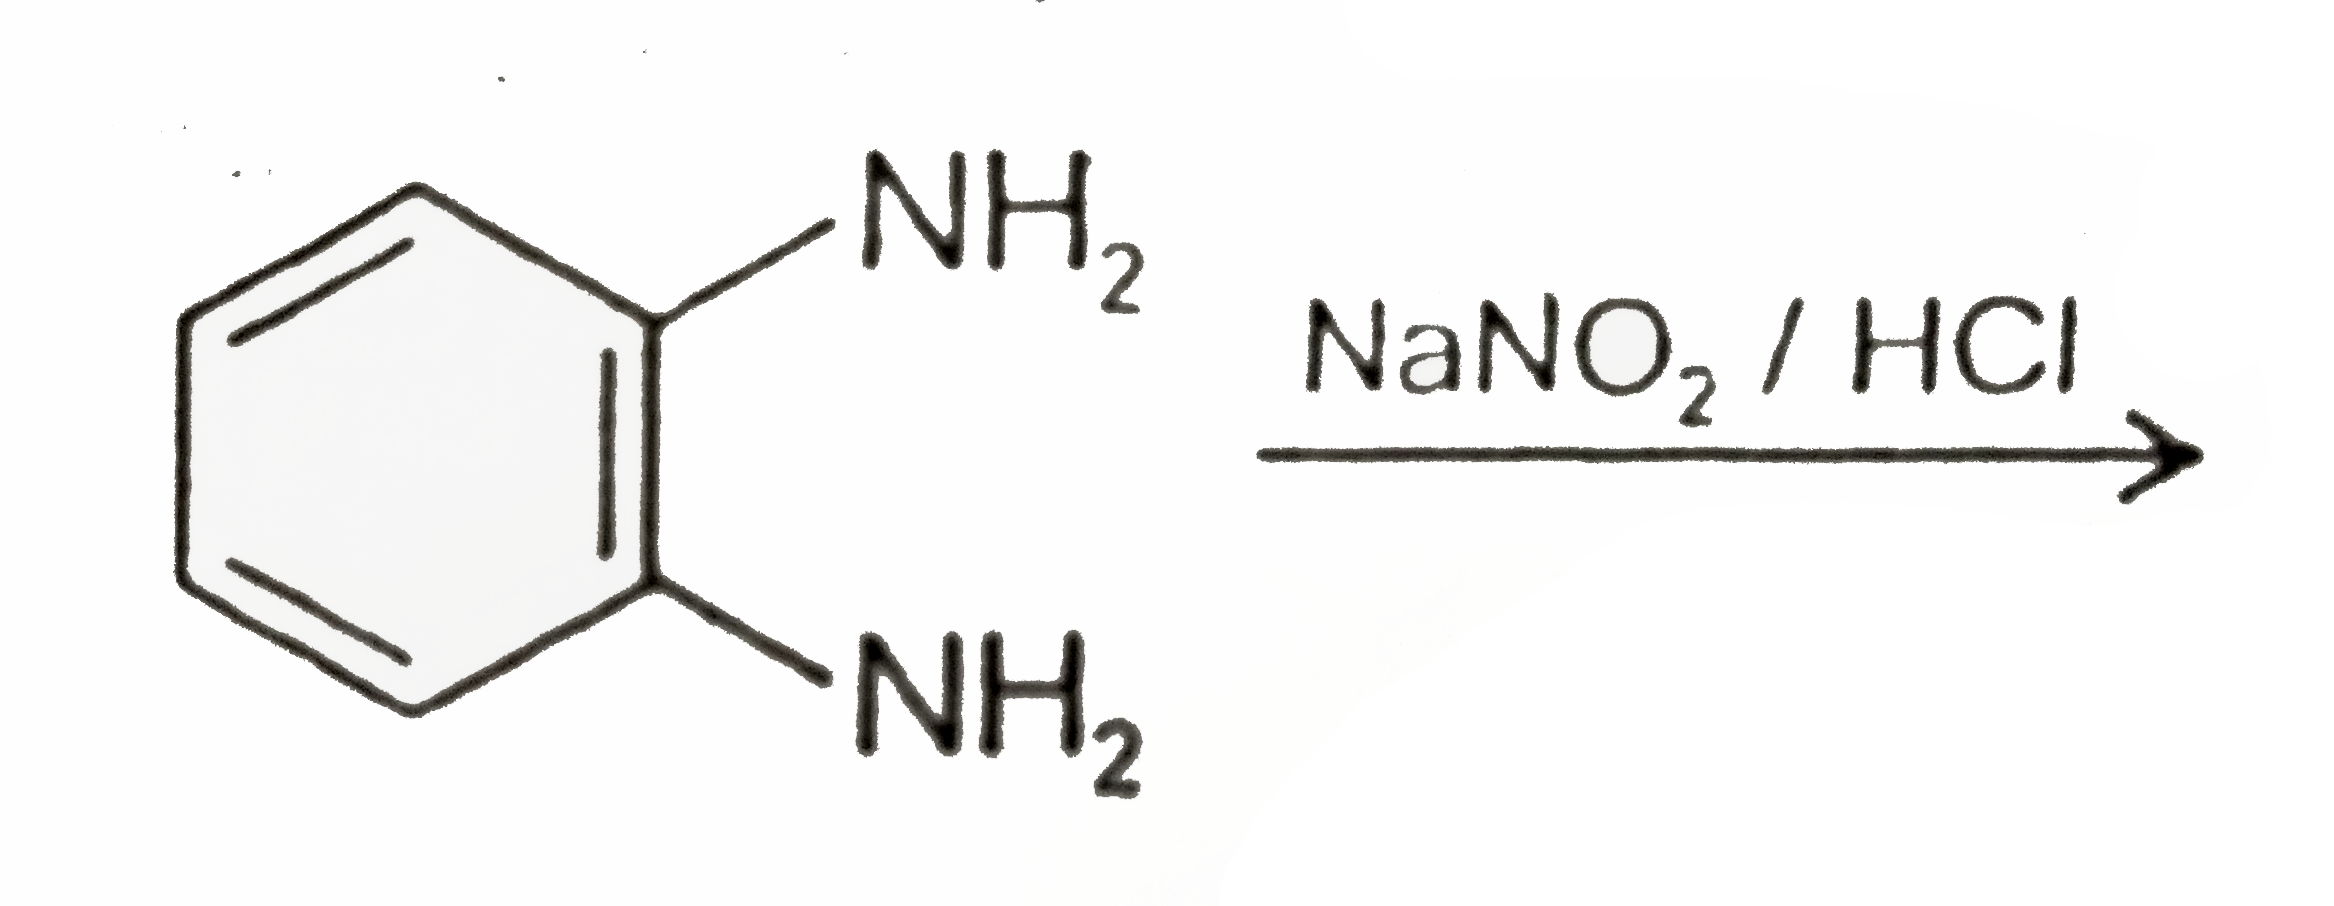 Treatment of primary amines with nitrous acid gives diazonium ions. Aliphatic diazonium ions decompose under the diazotization conditions to give complex mixture of products. Aryldiazonium ions are stable and is a valubale intermediate. They react with activated aromatic compounds to give coupling product.   What would be the product of the given reaction?